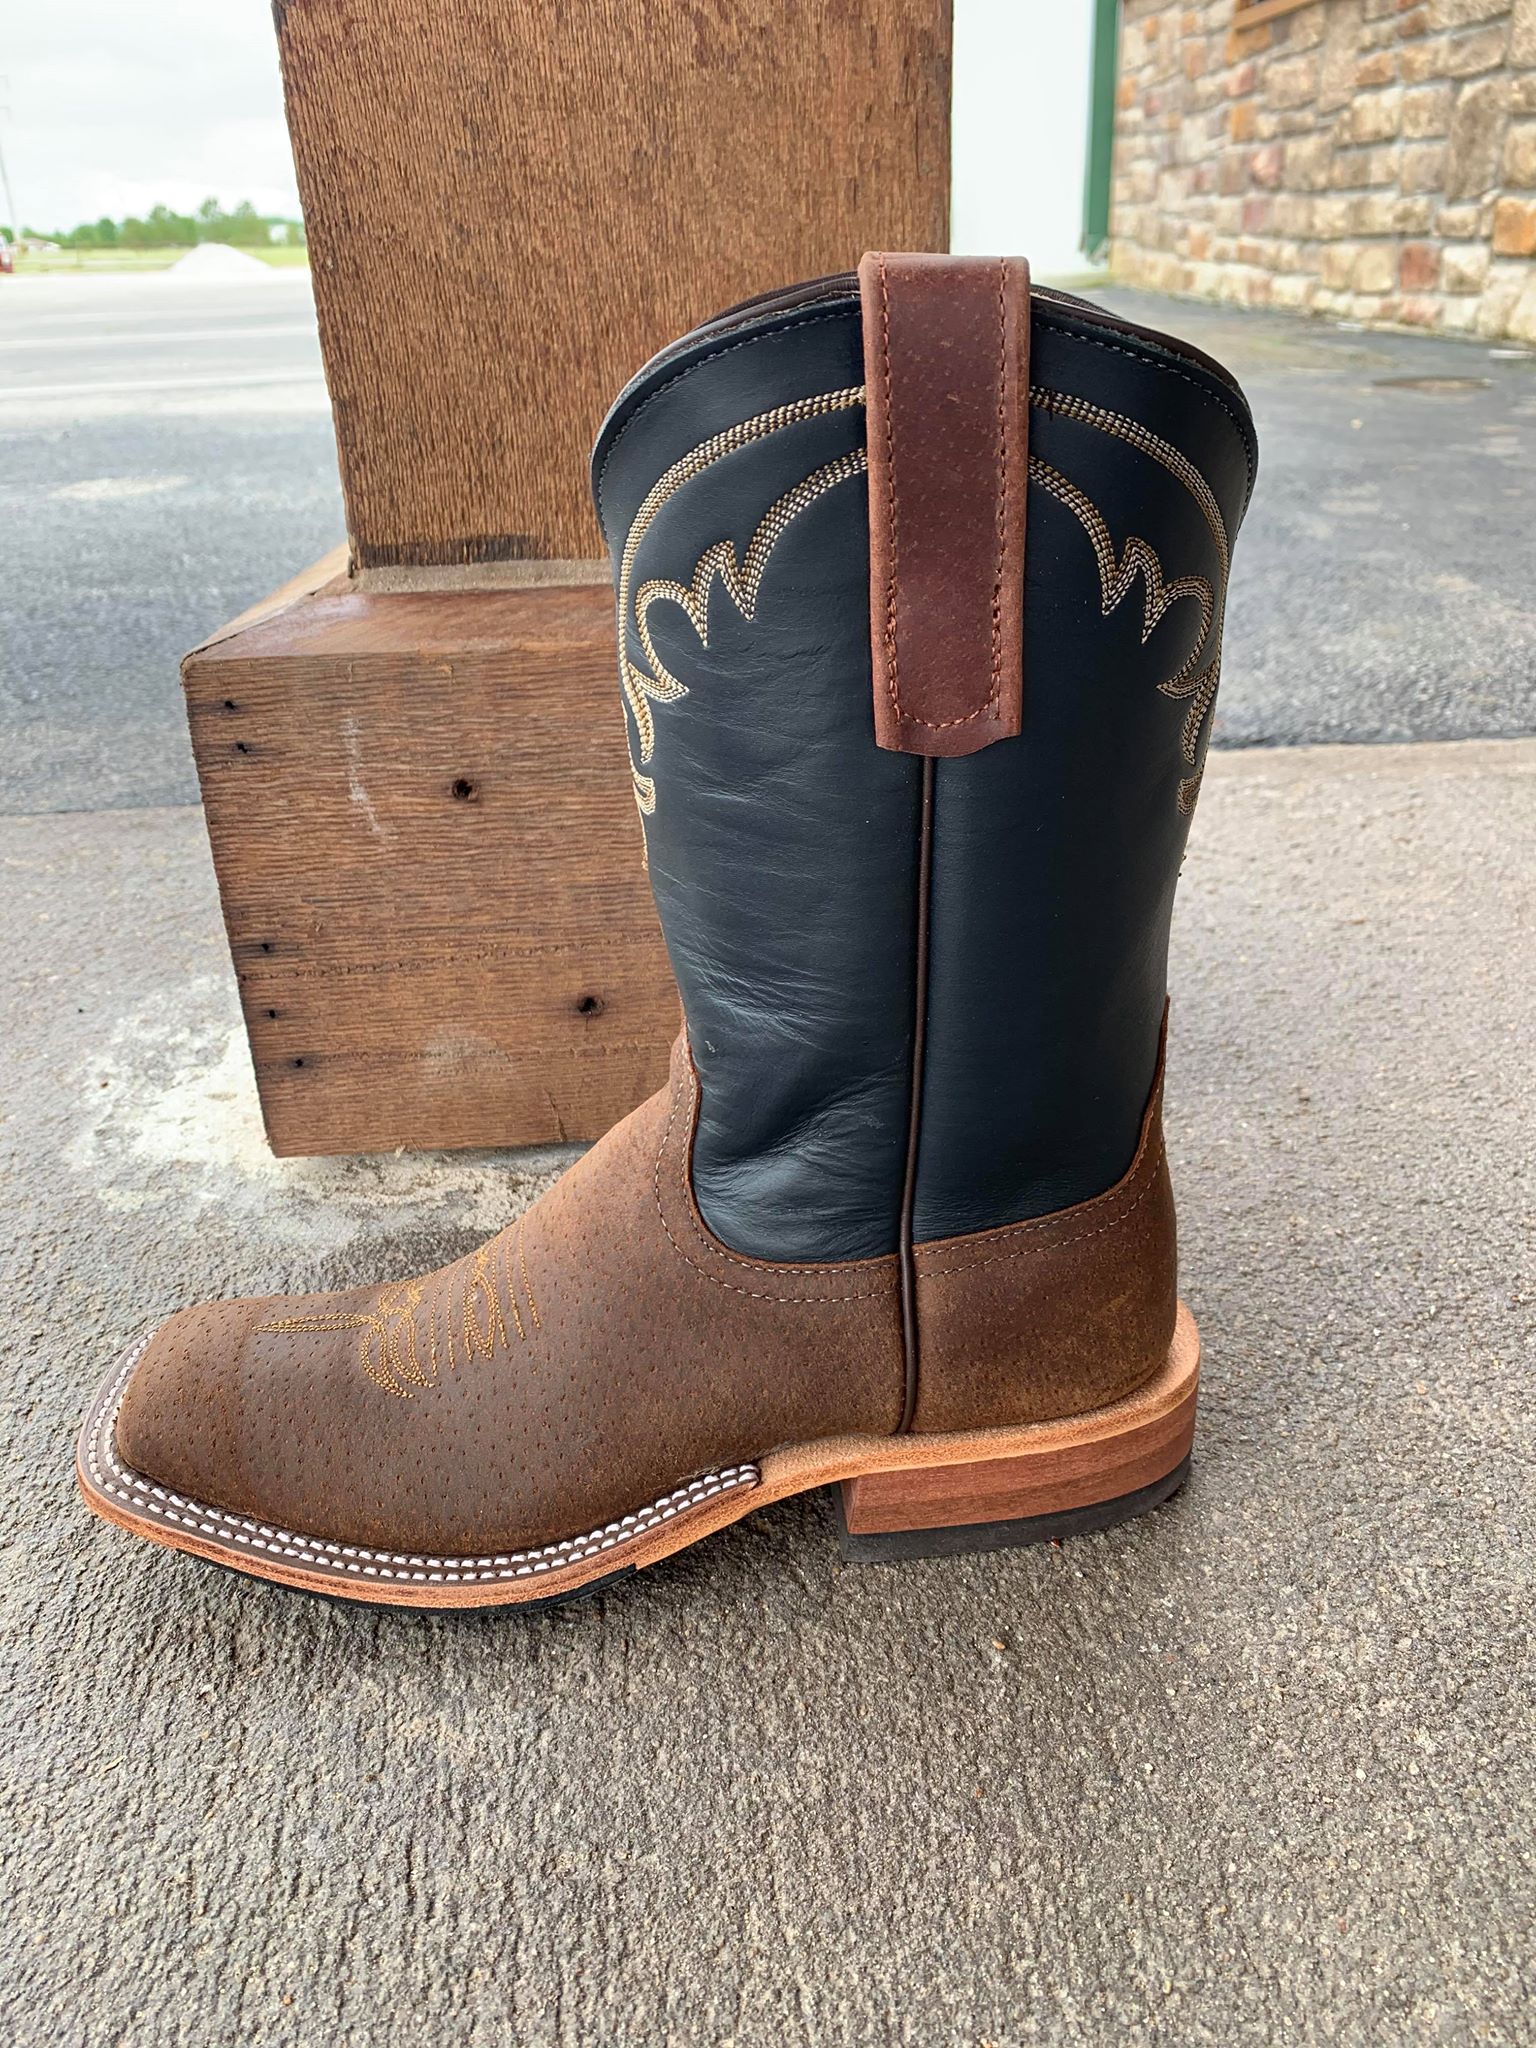 Women's AB Chocolate Sow-Women's Boots-Anderson Bean-Lucky J Boots & More, Women's, Men's, & Kids Western Store Located in Carthage, MO